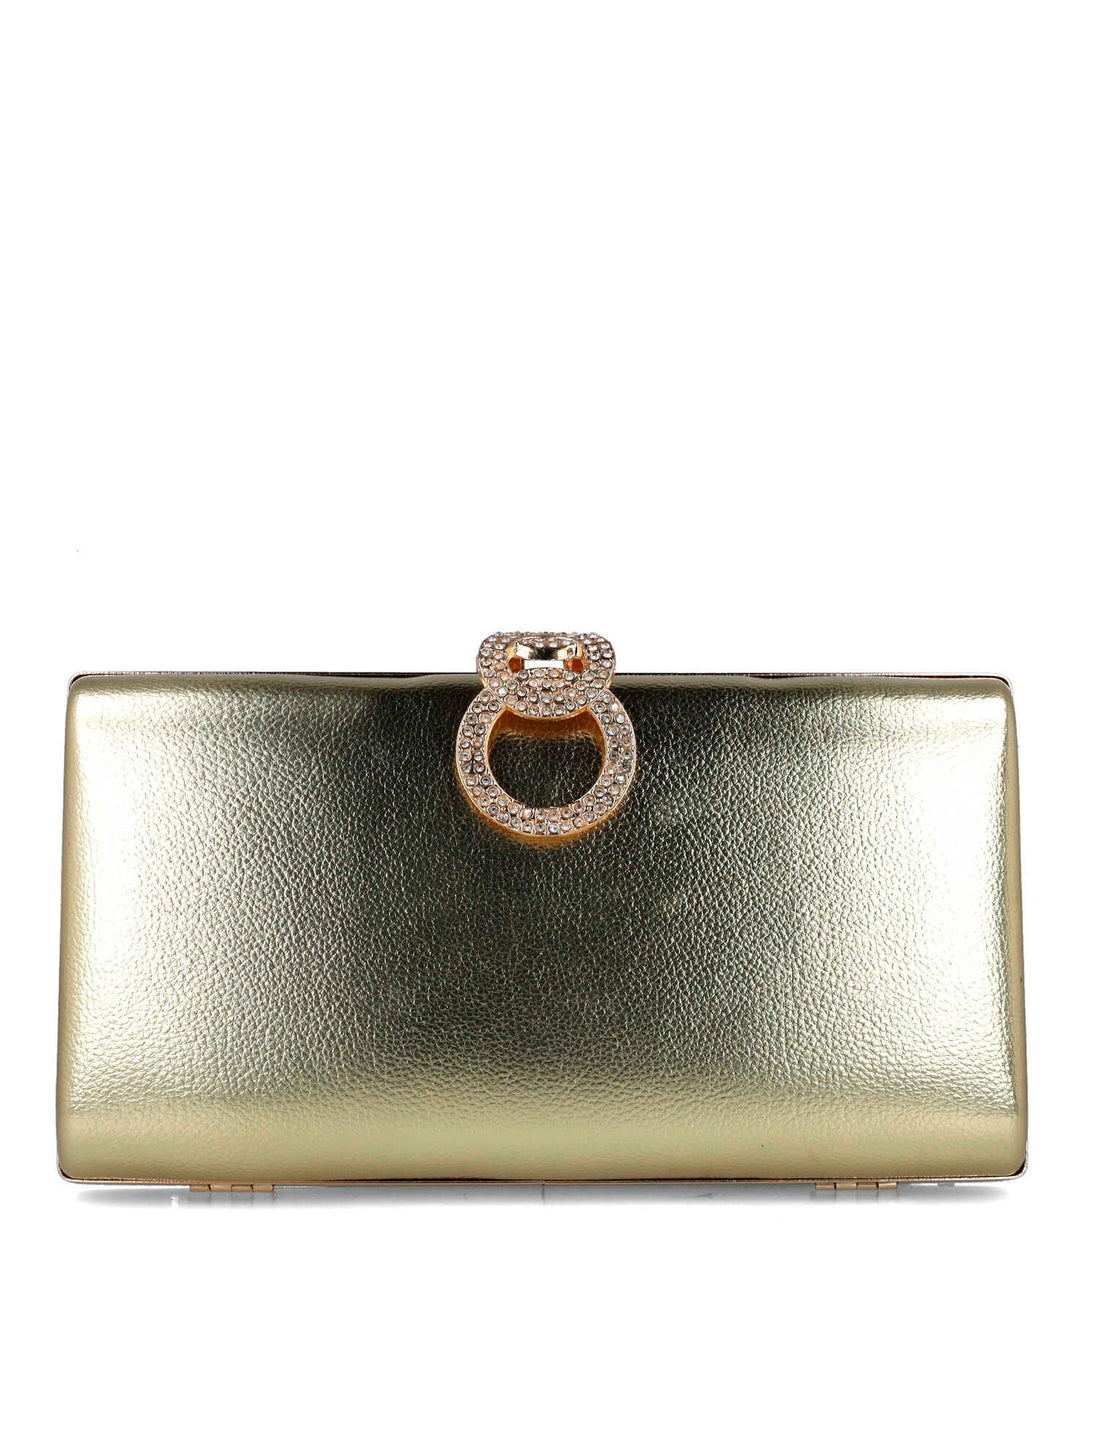 Gold Clutch Bag With Embellishment_85648_00_01